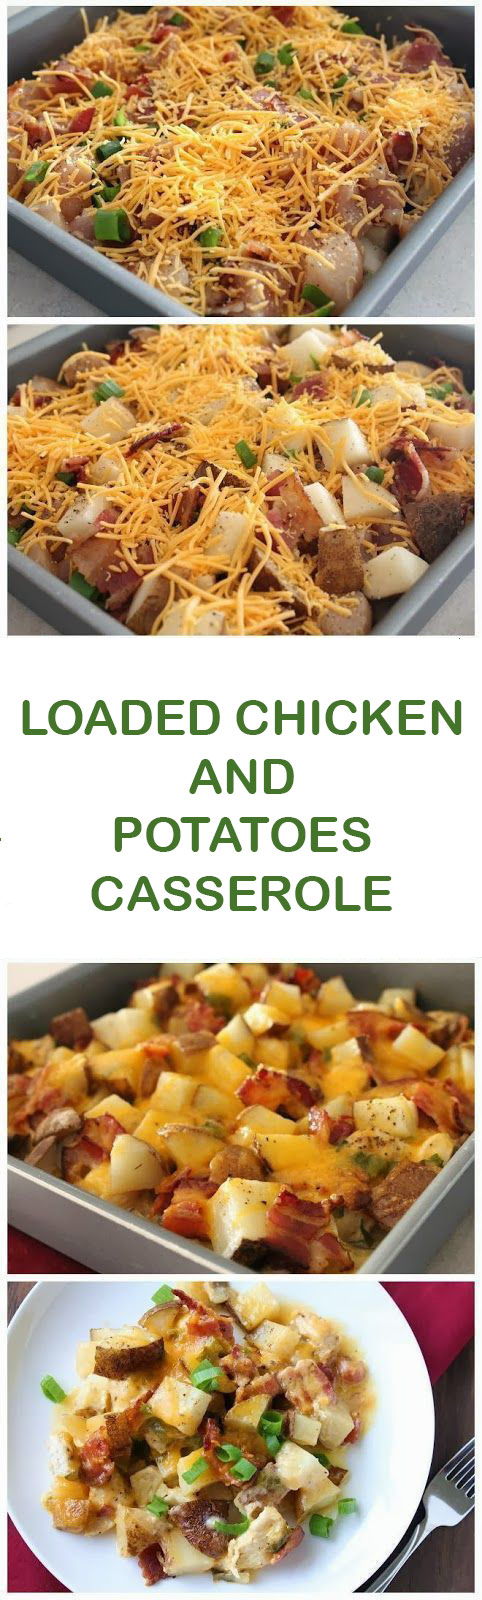 Loaded Chicken and Potatoes Casserole